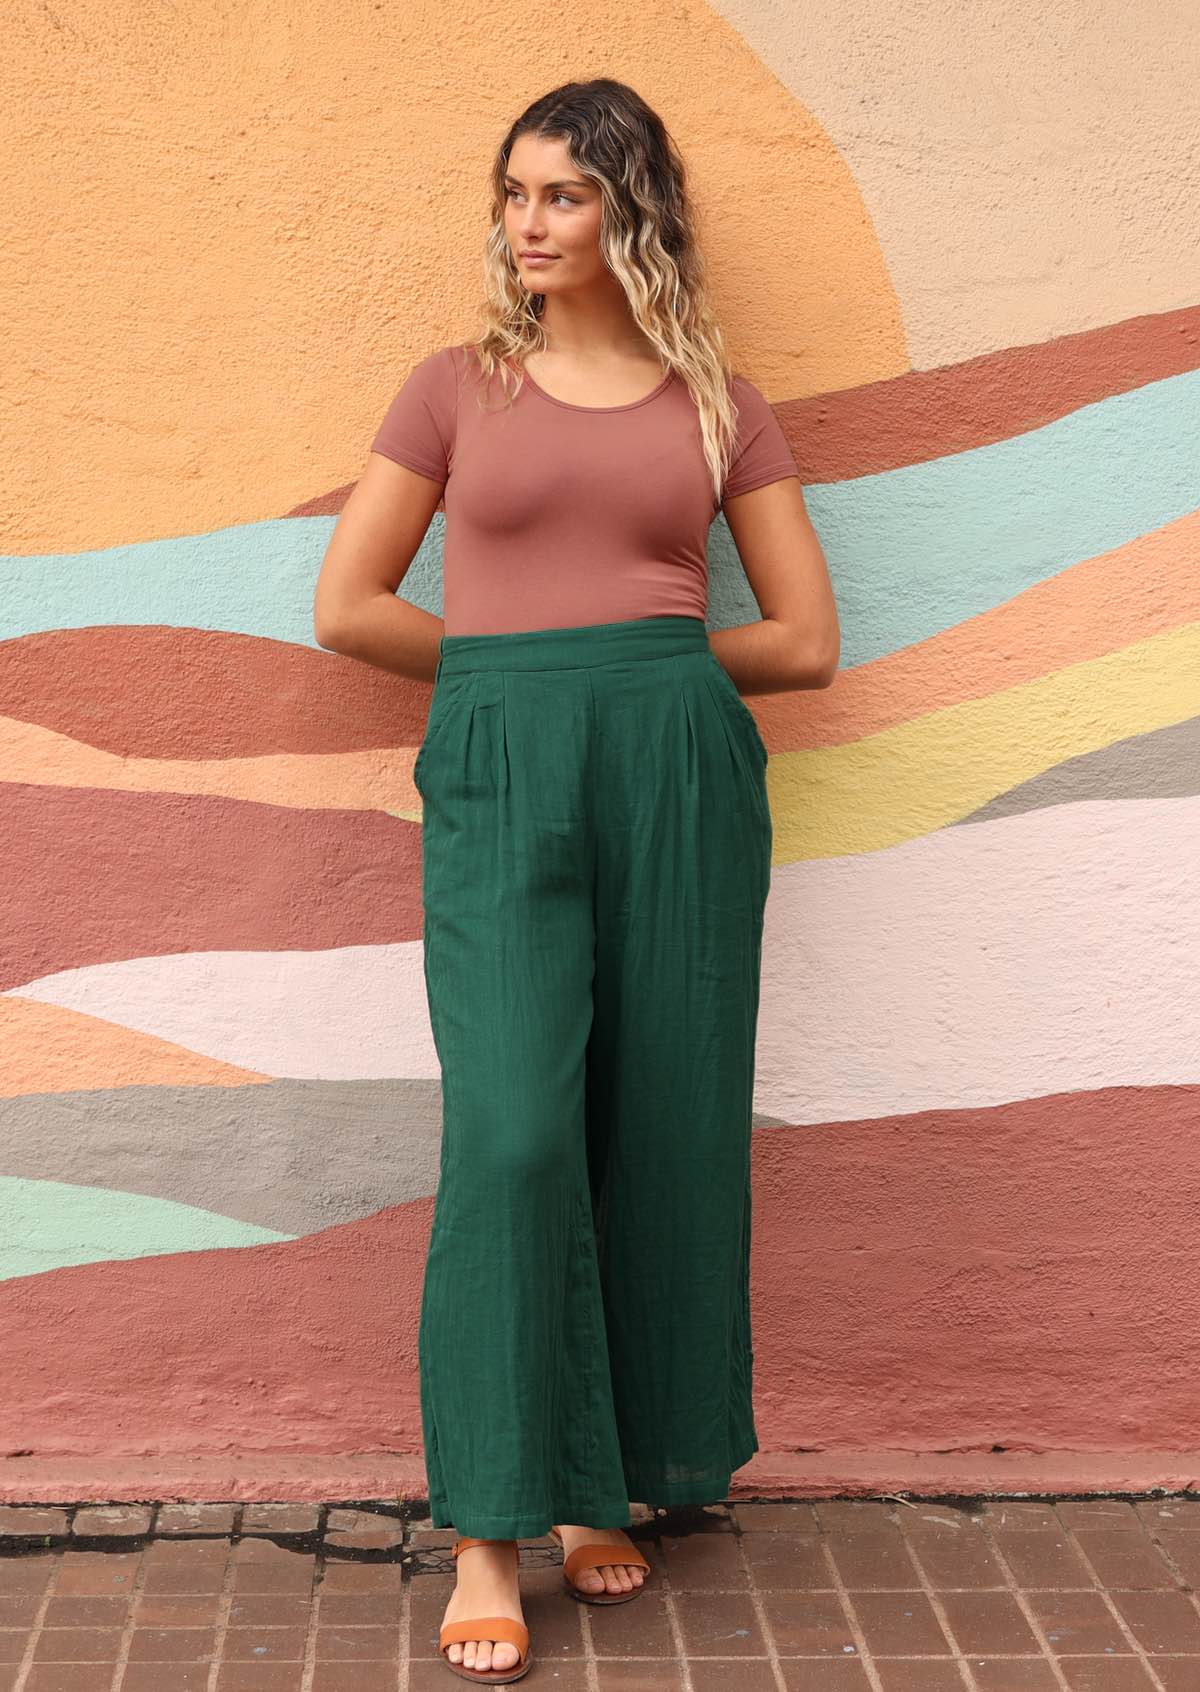 model leaning against wall wearing green pants, dusty pink shirt